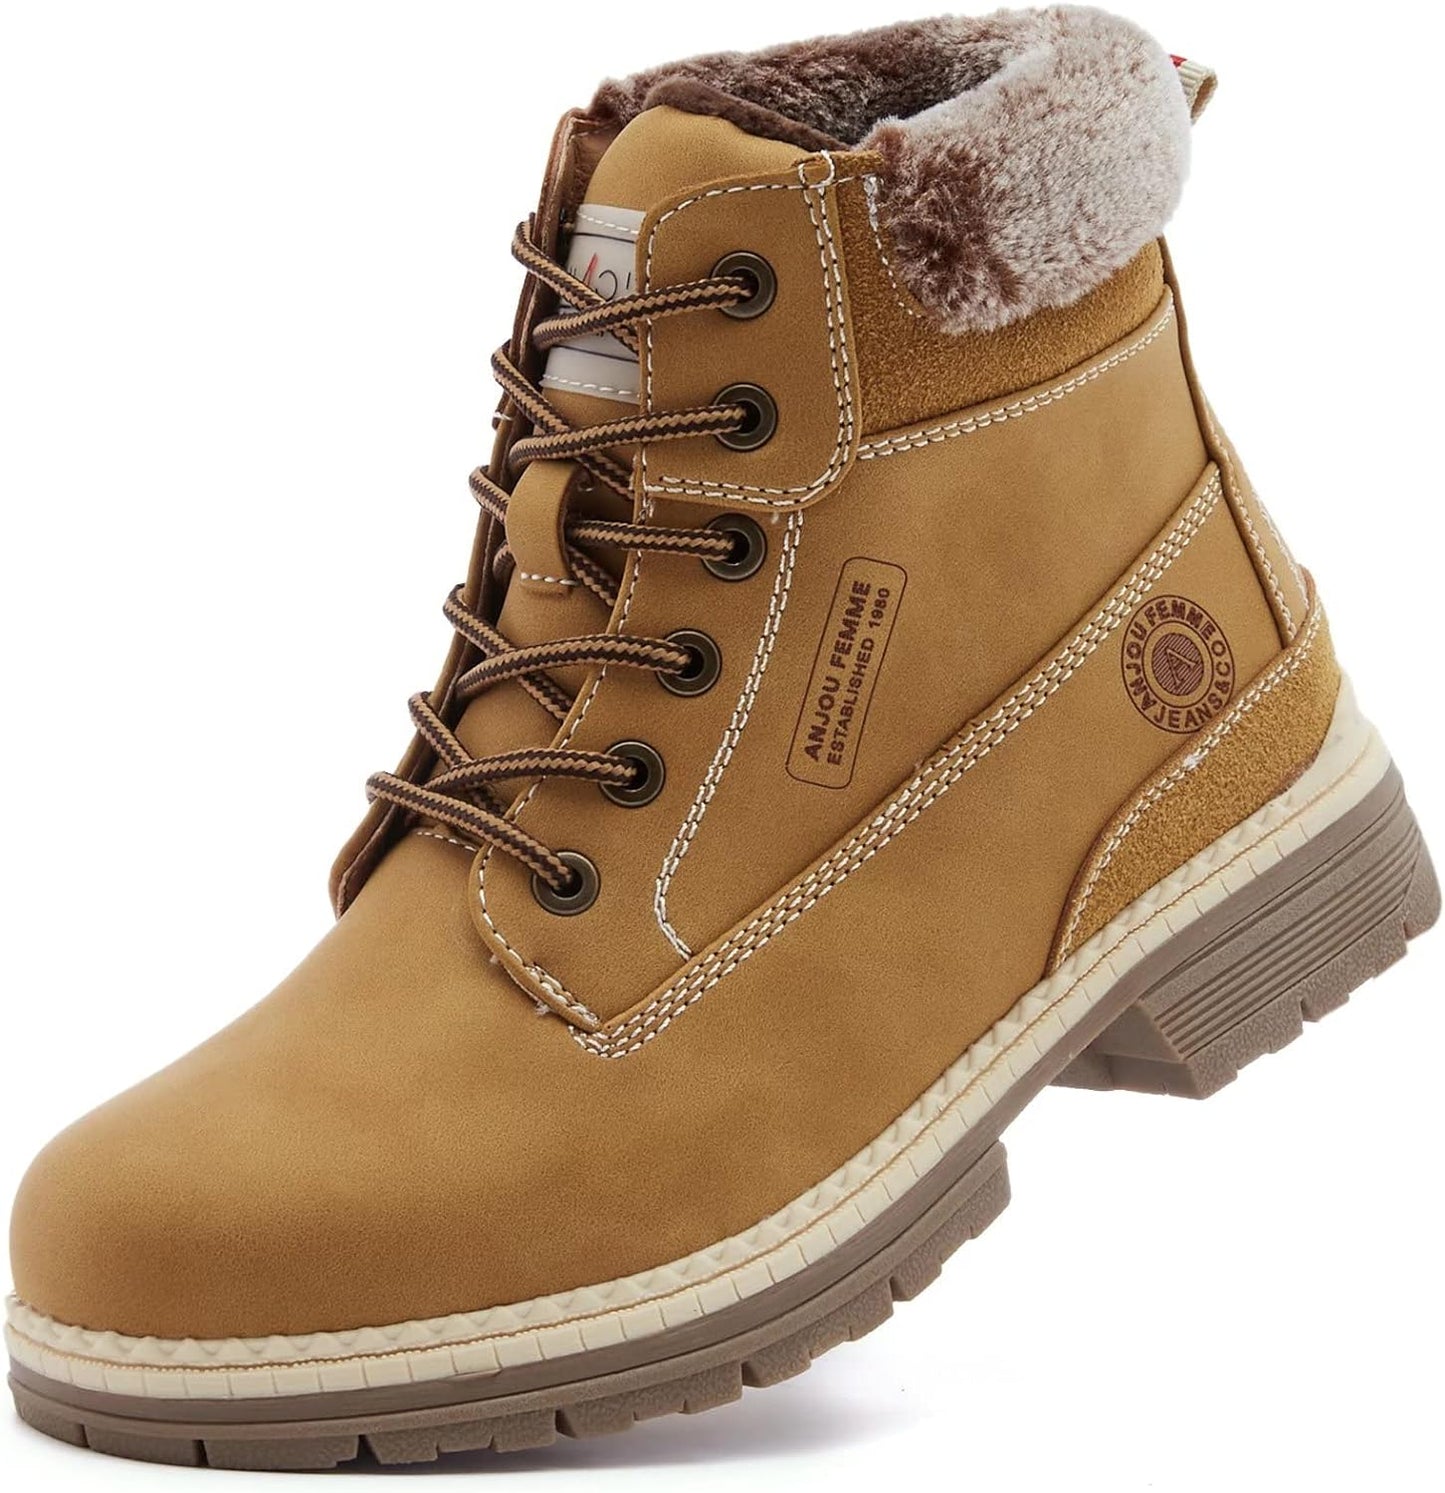 Womens Hiking Snow Winter Boots